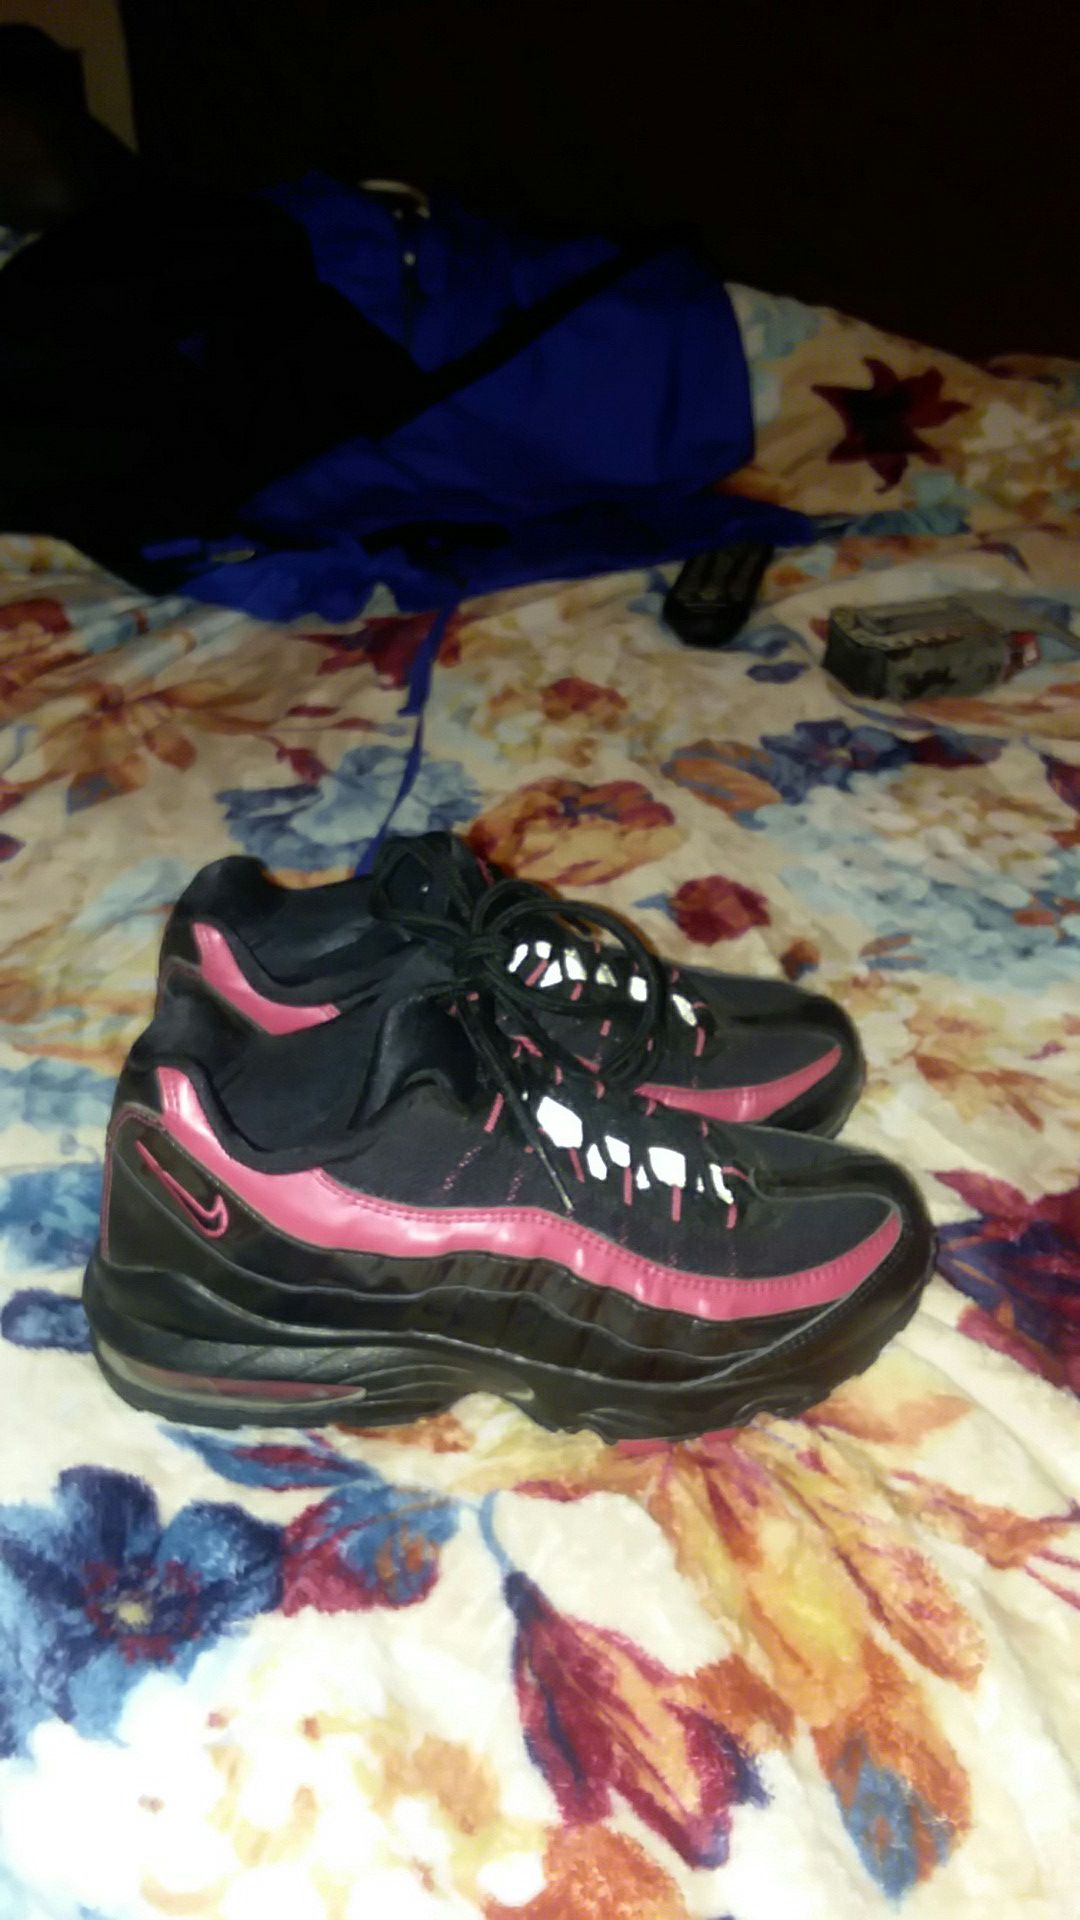 Air max nike womens tennis shoes.size 6 and is in excellent condition. Black and pick very nice pair of nikes